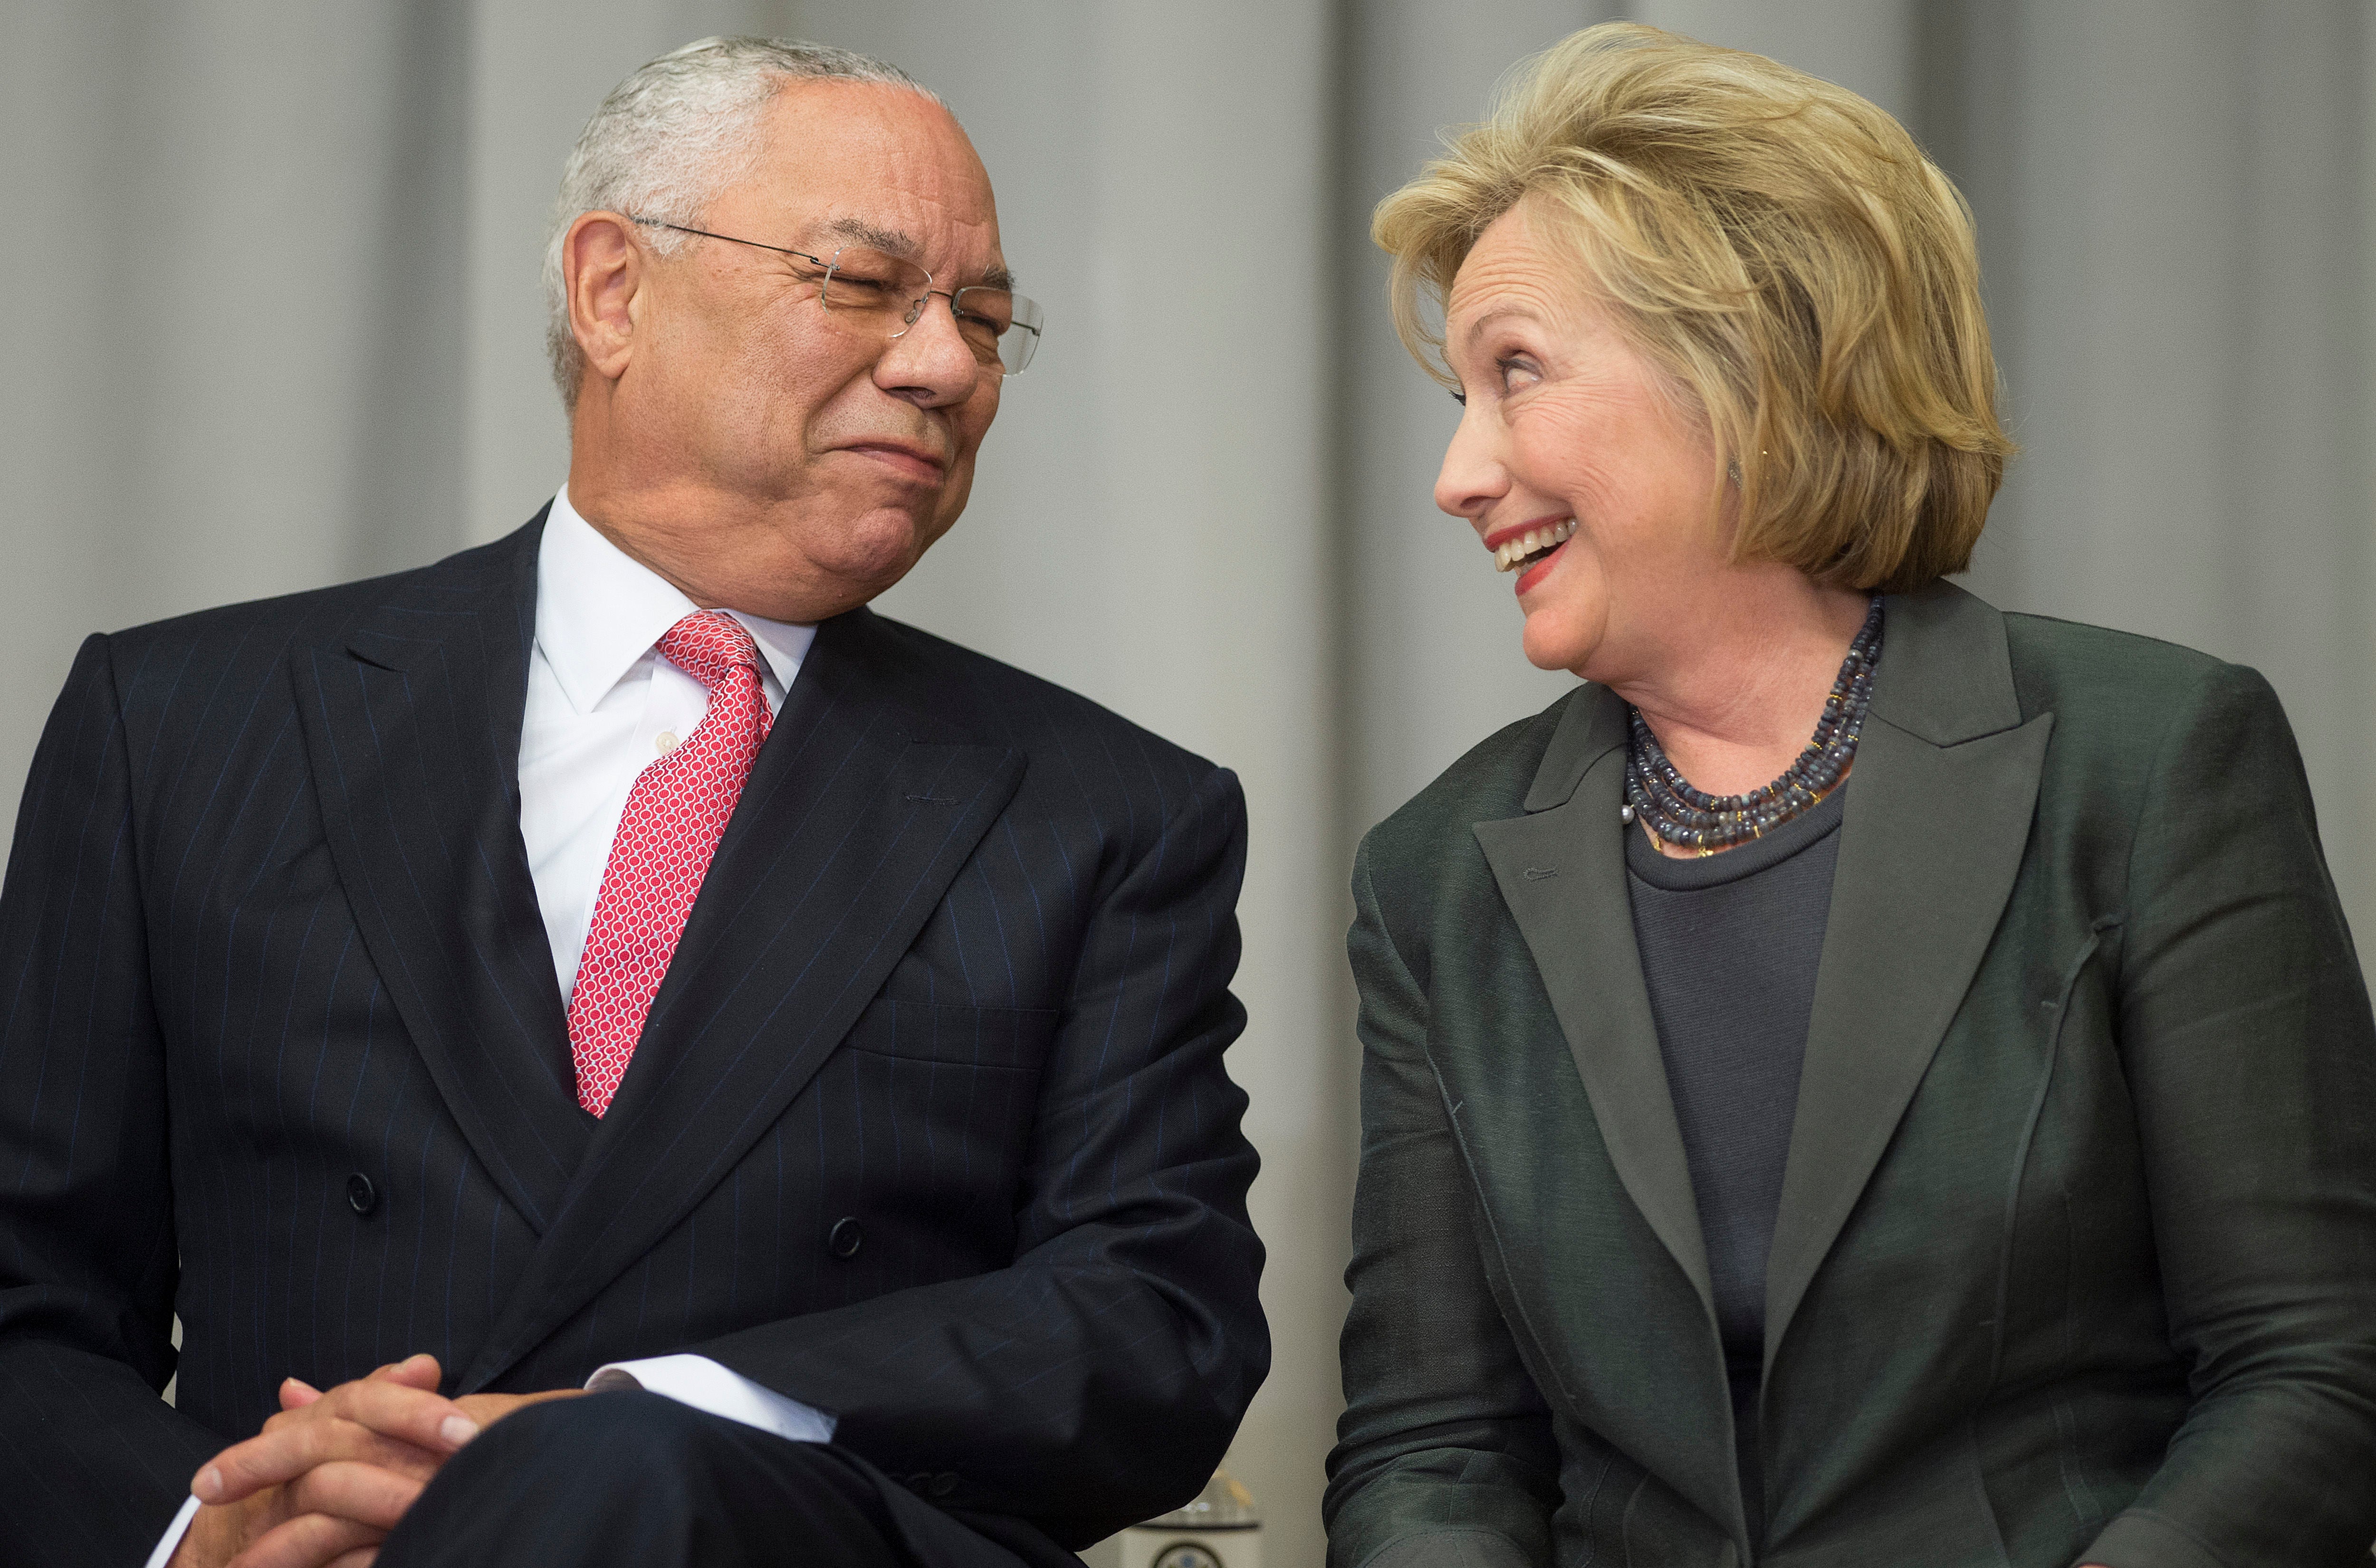 Colin Powell: "I Am Voting For Hillary Clinton"
